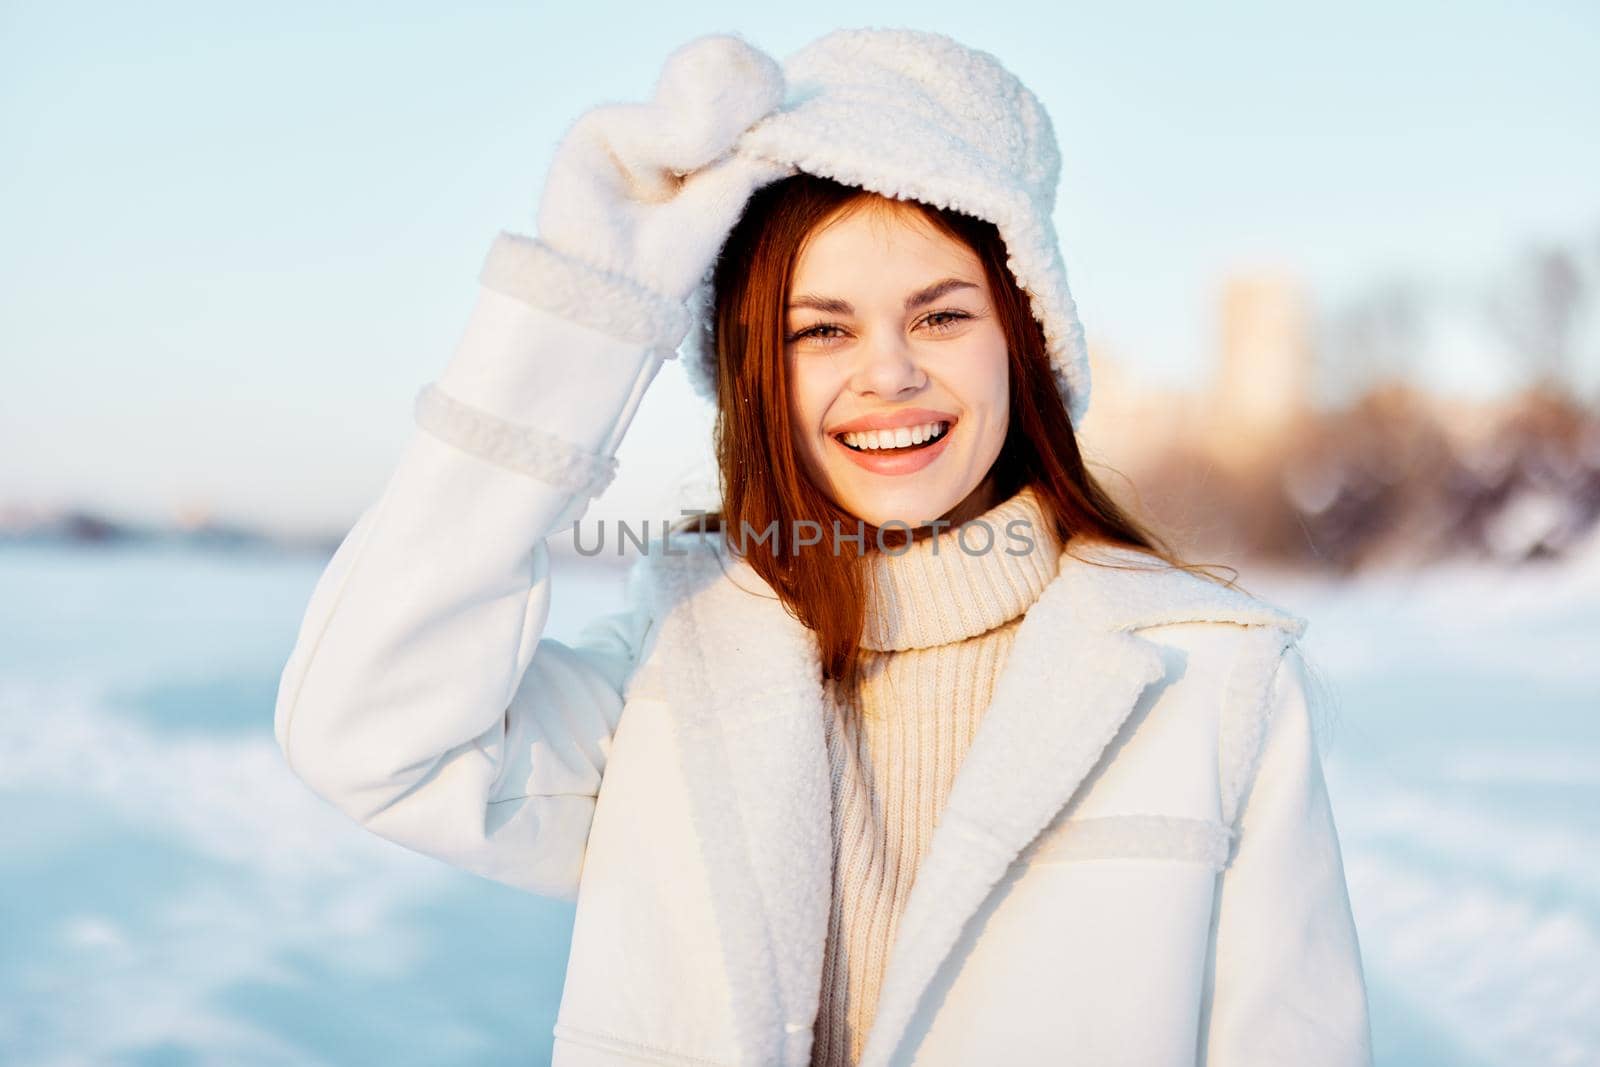 young woman in a white coat in a hat winter landscape walk nature by SHOTPRIME